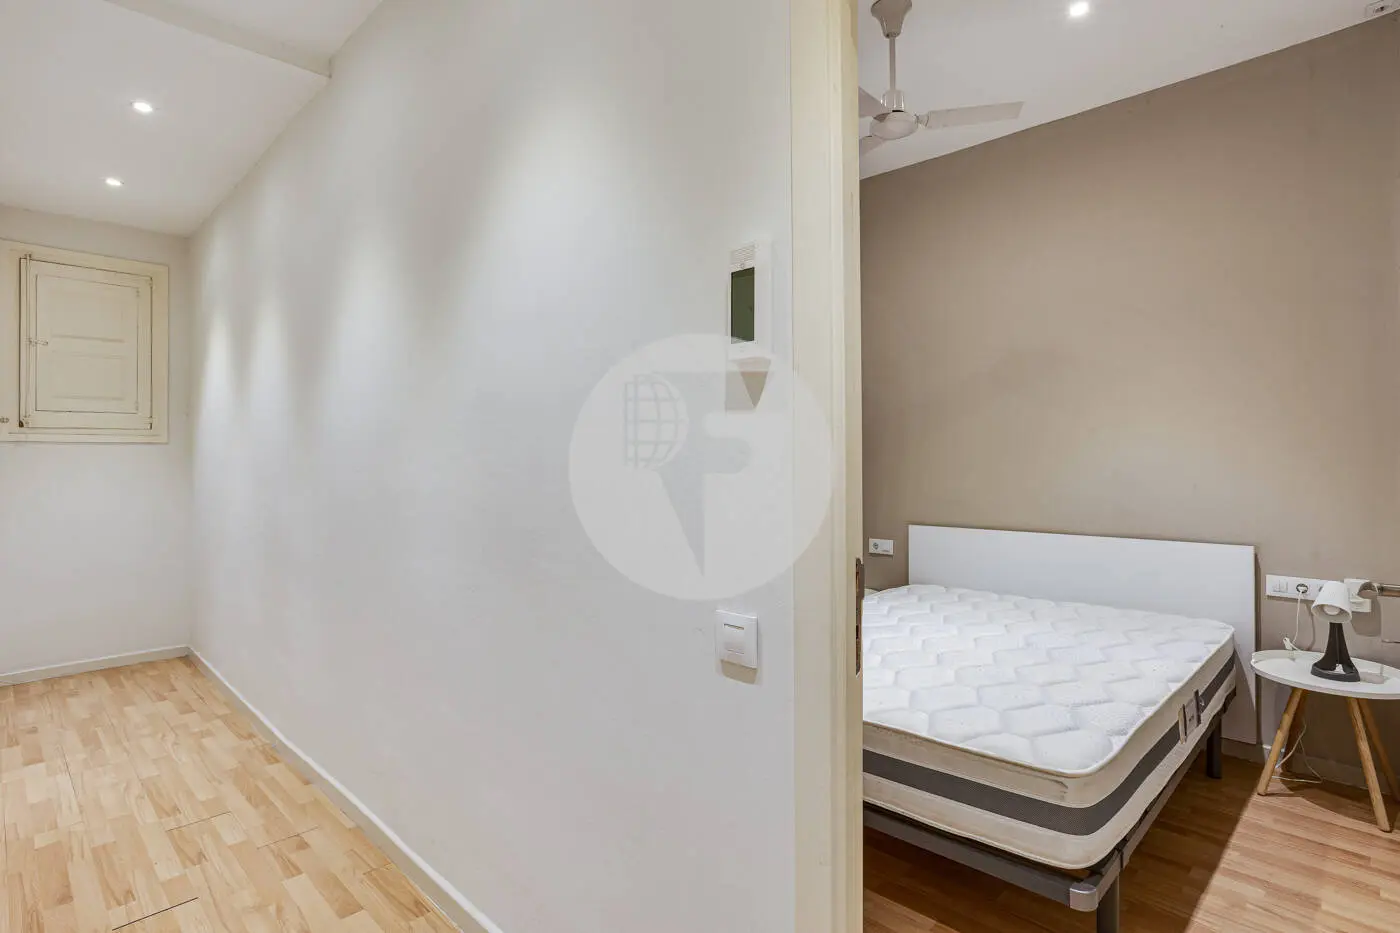 Magnificent apartment for sale next to Pl Universitat of 114m2 according to the land registry, located on Tallers Street in the Ciutat Vella neighborhood of Barcelona 10